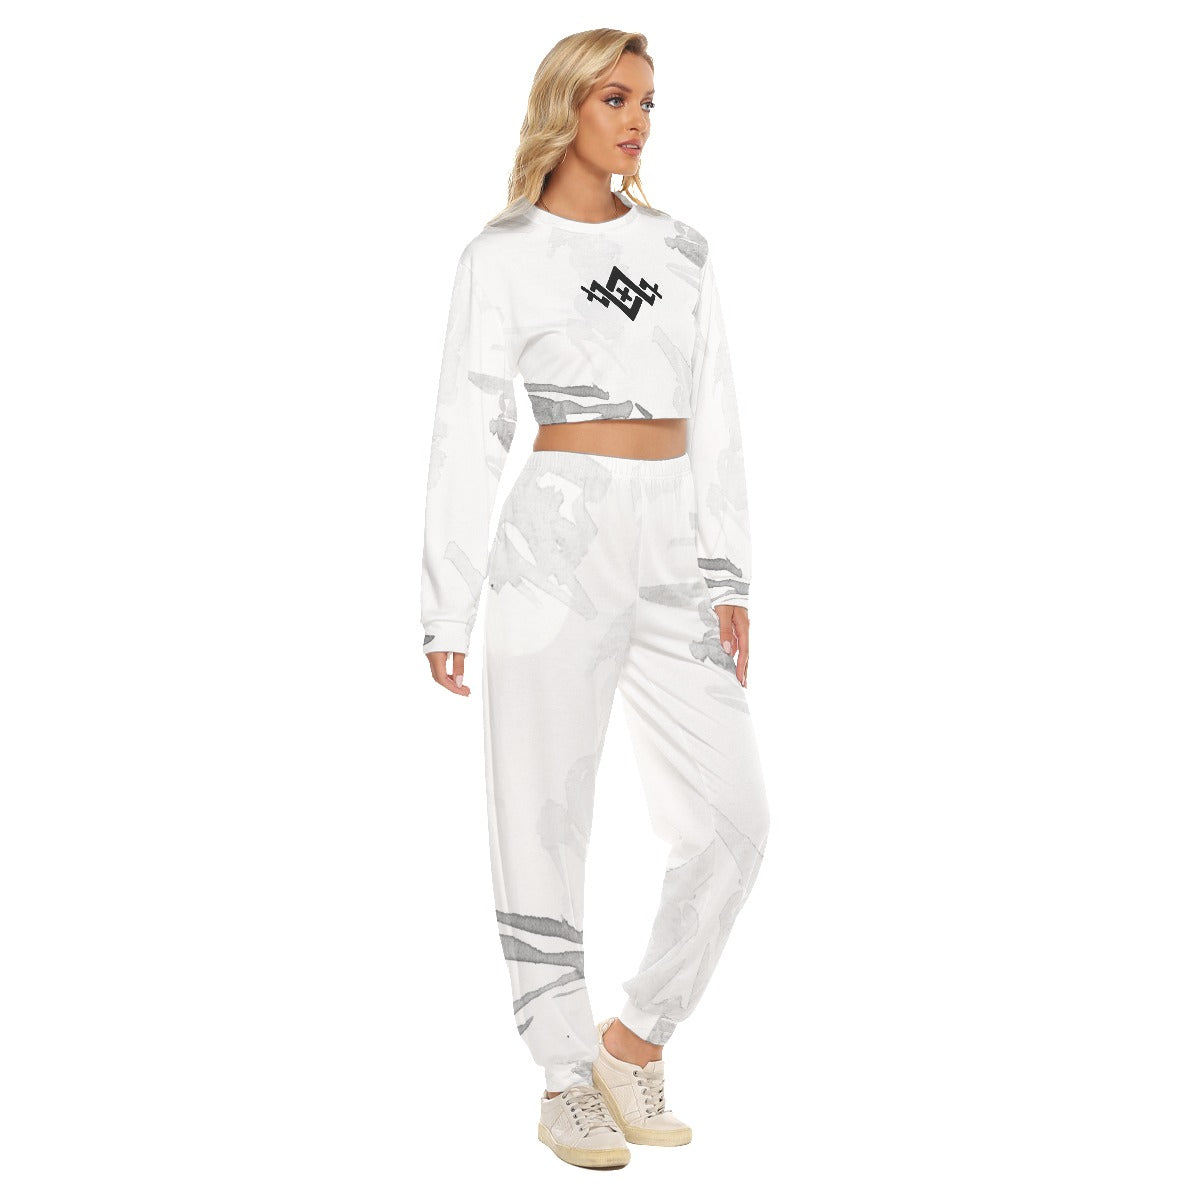 Women's All Over Print Cropped Sweatsuit